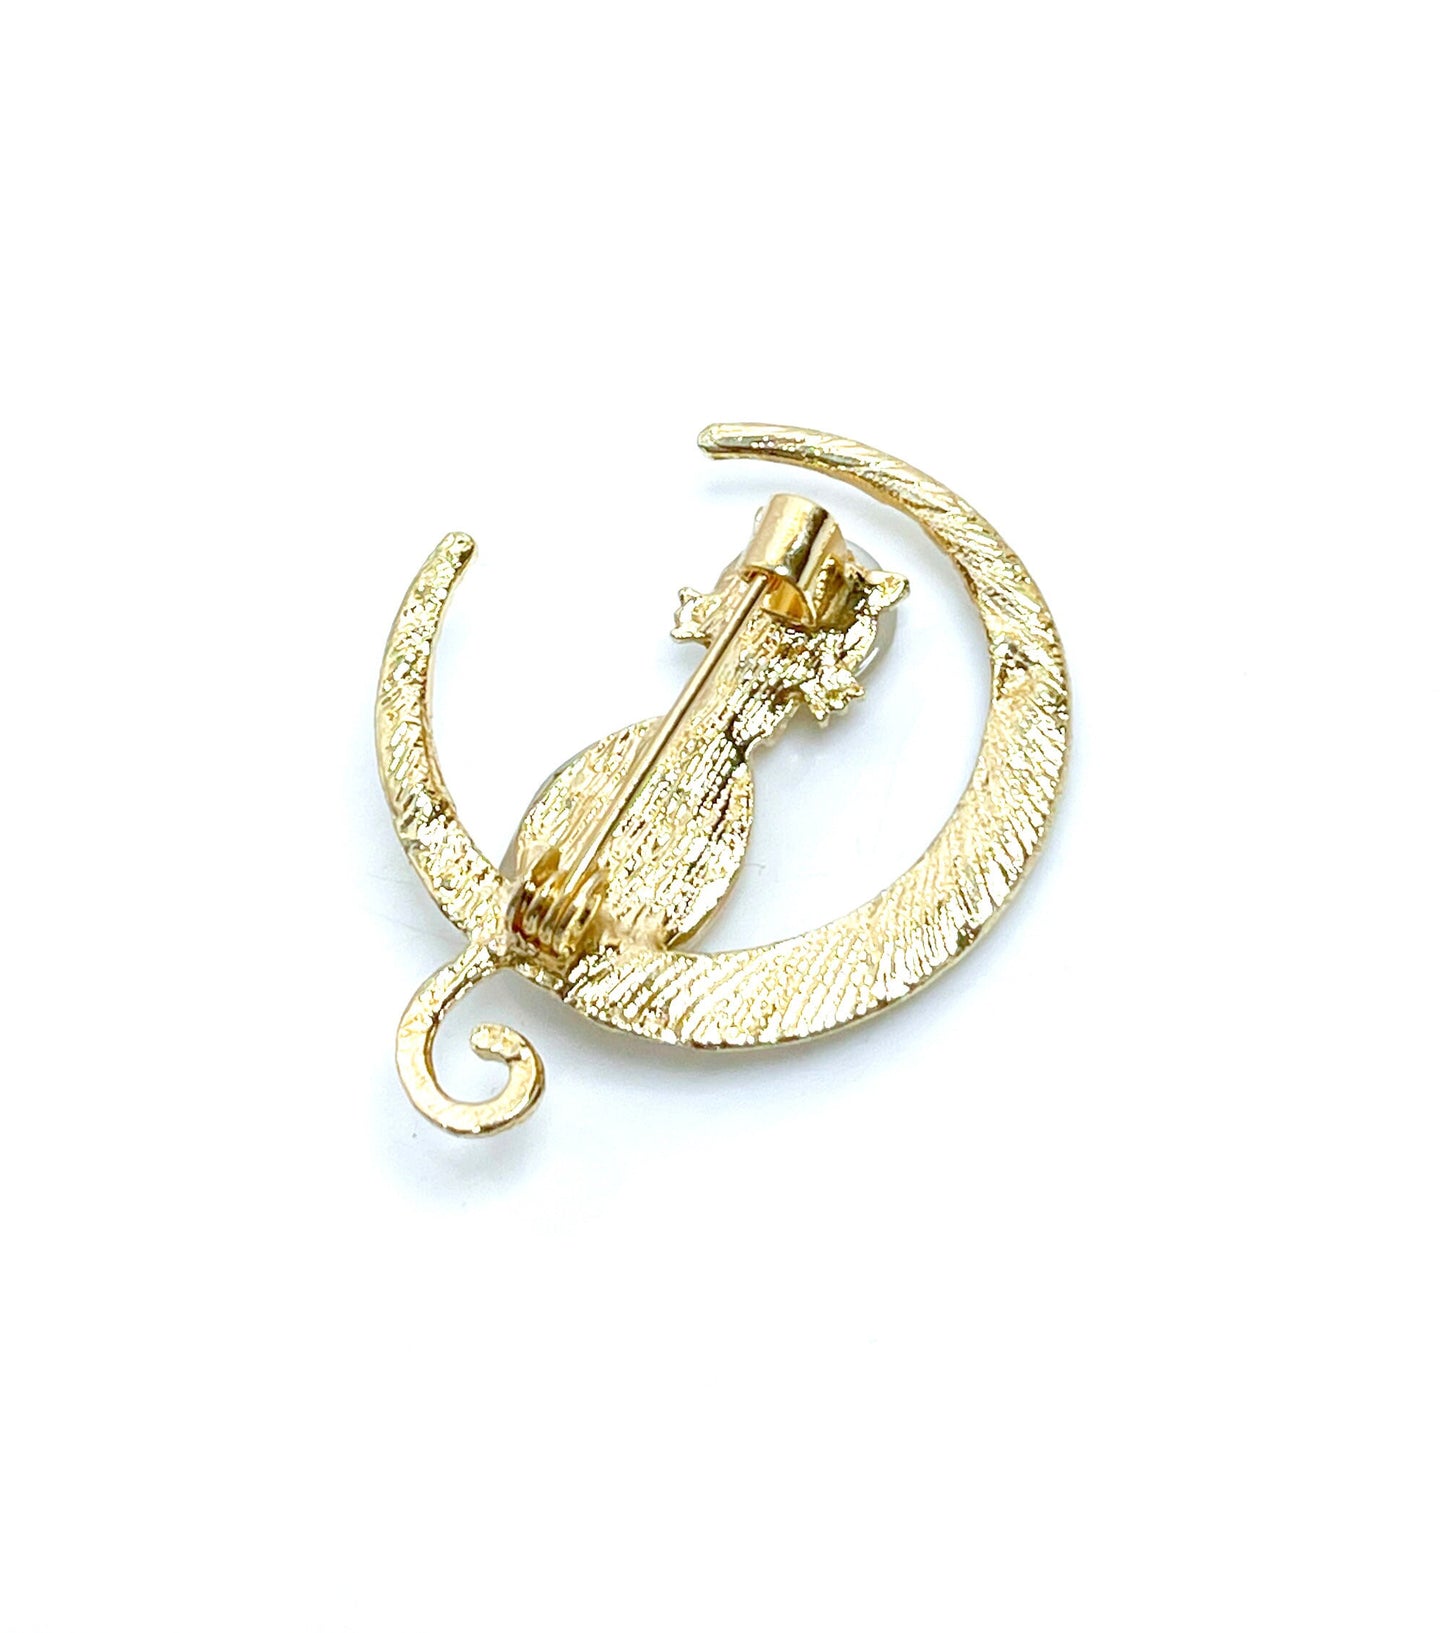 Gold Cat on the Moon Brooch, Opal Cat Pin, Dainty Crystal Cat Jewelry, Animal Lovers, Pet Lovers, Pin for Scarf Jacket, Brooch for Women